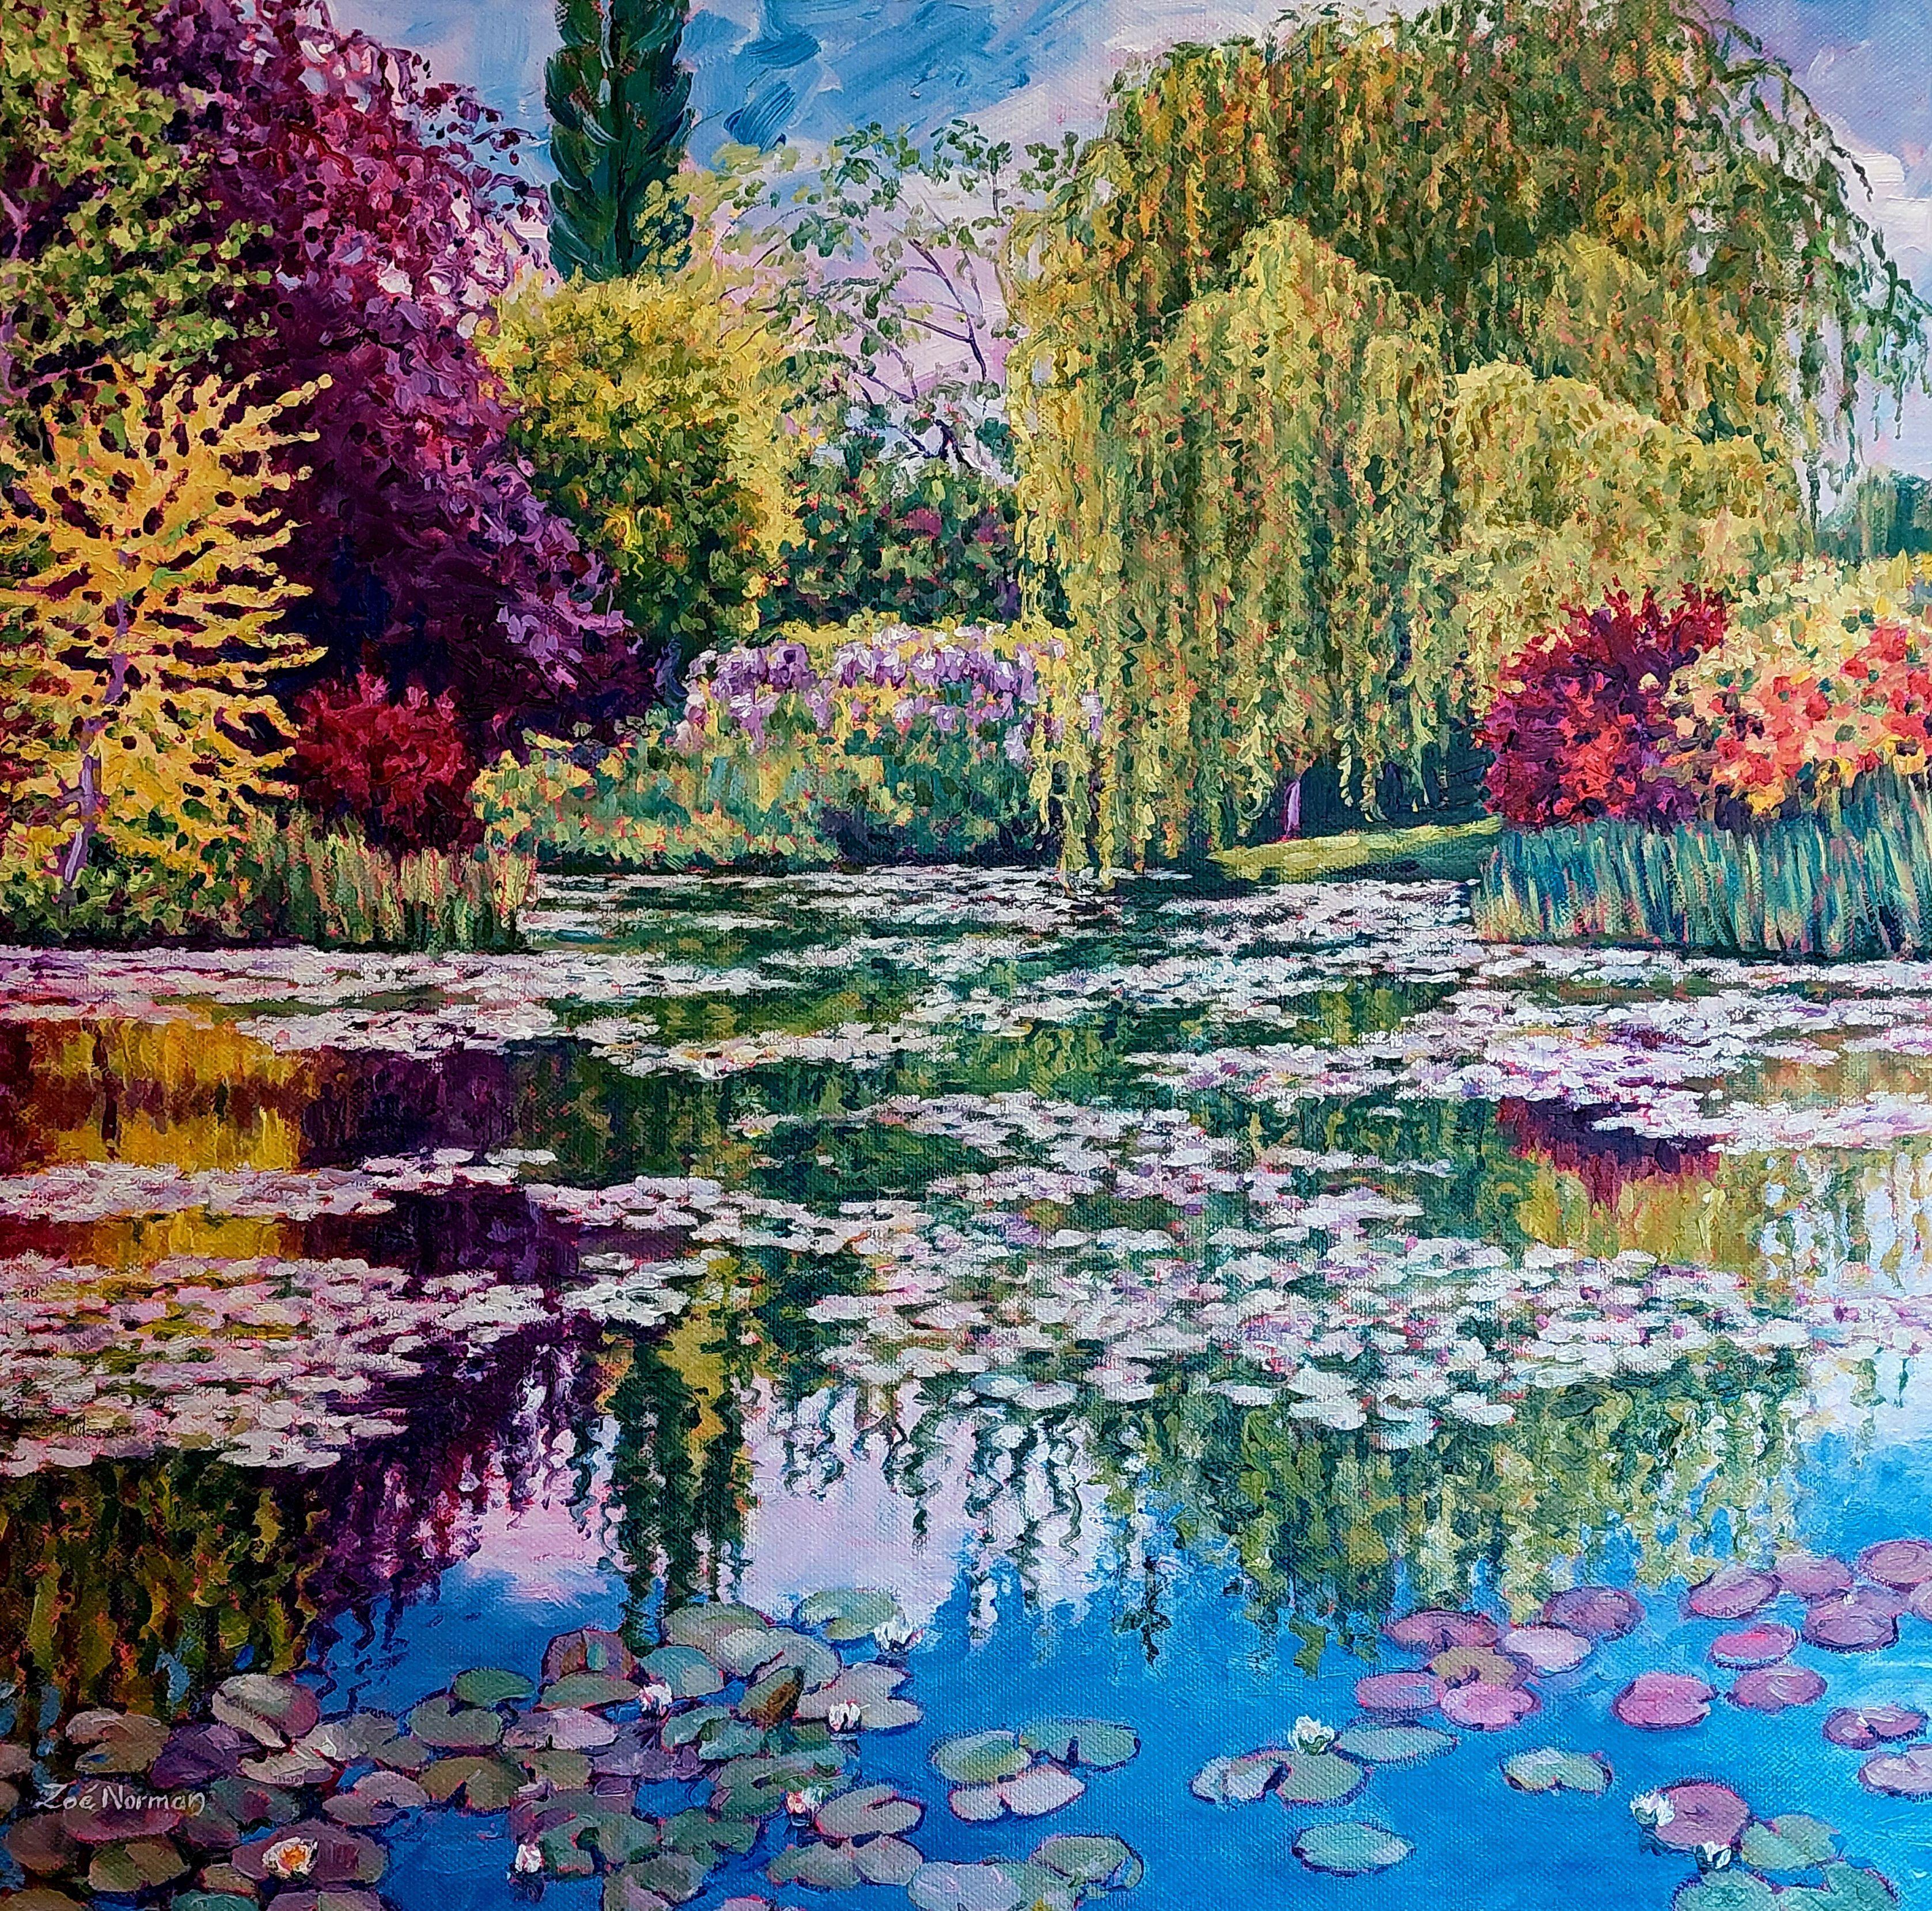 Contemporary Impressionism.    Stunning oil painting inspired by Claude Monet's iconic water garden at Giverny. Painted 'Alla Prema' with lively brush strokes and thickly applied vibrant oil paints; this is a unique and spectacular statement piece